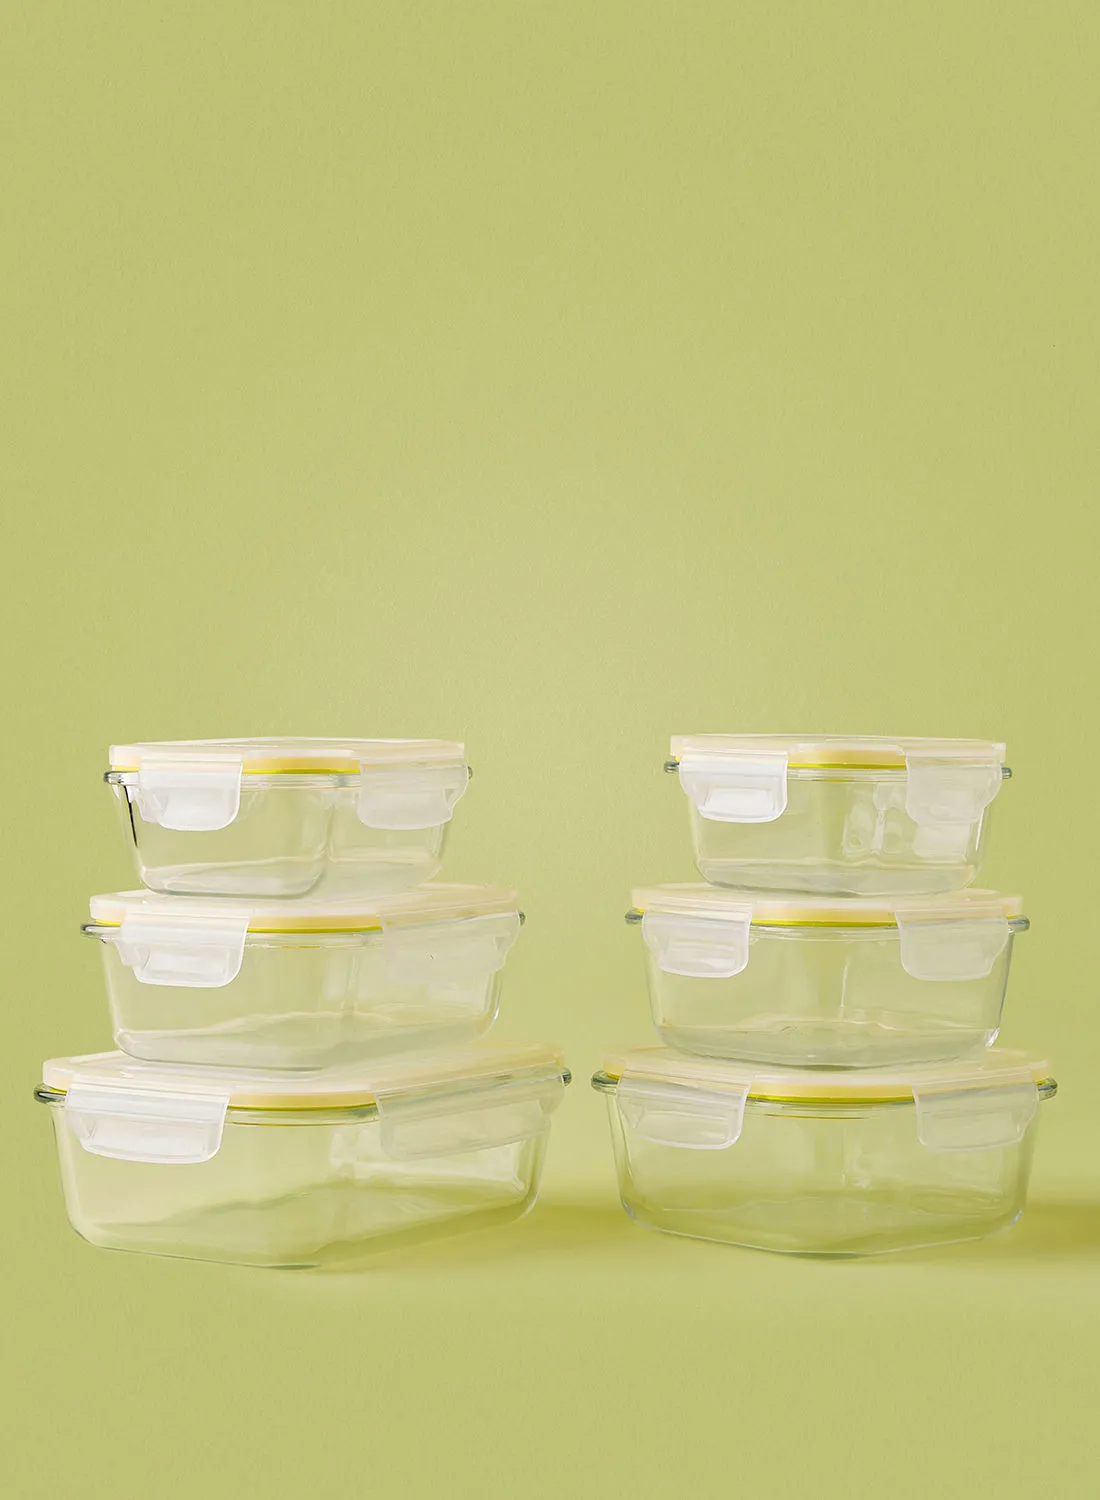 noon east 6 Piece Borosilicate Glass Food Container Set - Airtight Lids - Lunch Box - Rectangle + Square - Food Storage Box - Storage Boxes - Kitchen Cabinet Organizers - Glass Food Container - Yellow